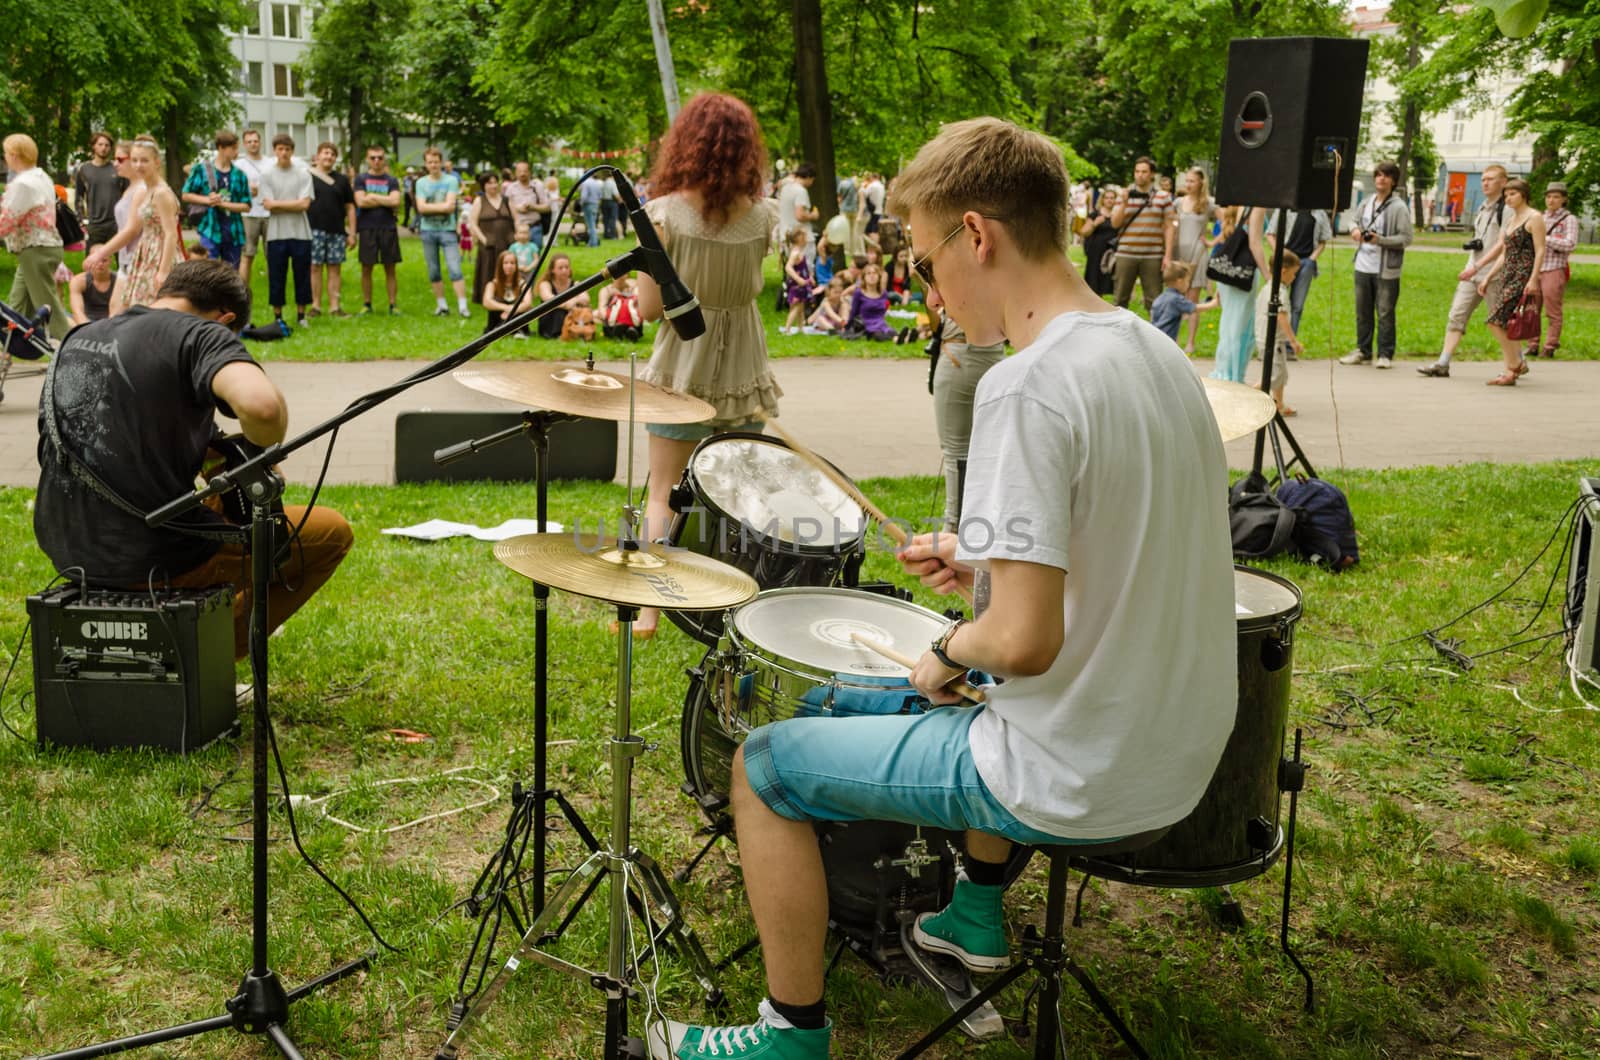 VILNIUS, LITHUANIA - MAY 18: the guy plays drums with friends music group for people in the park on May 18, 2013 in Vilnius.